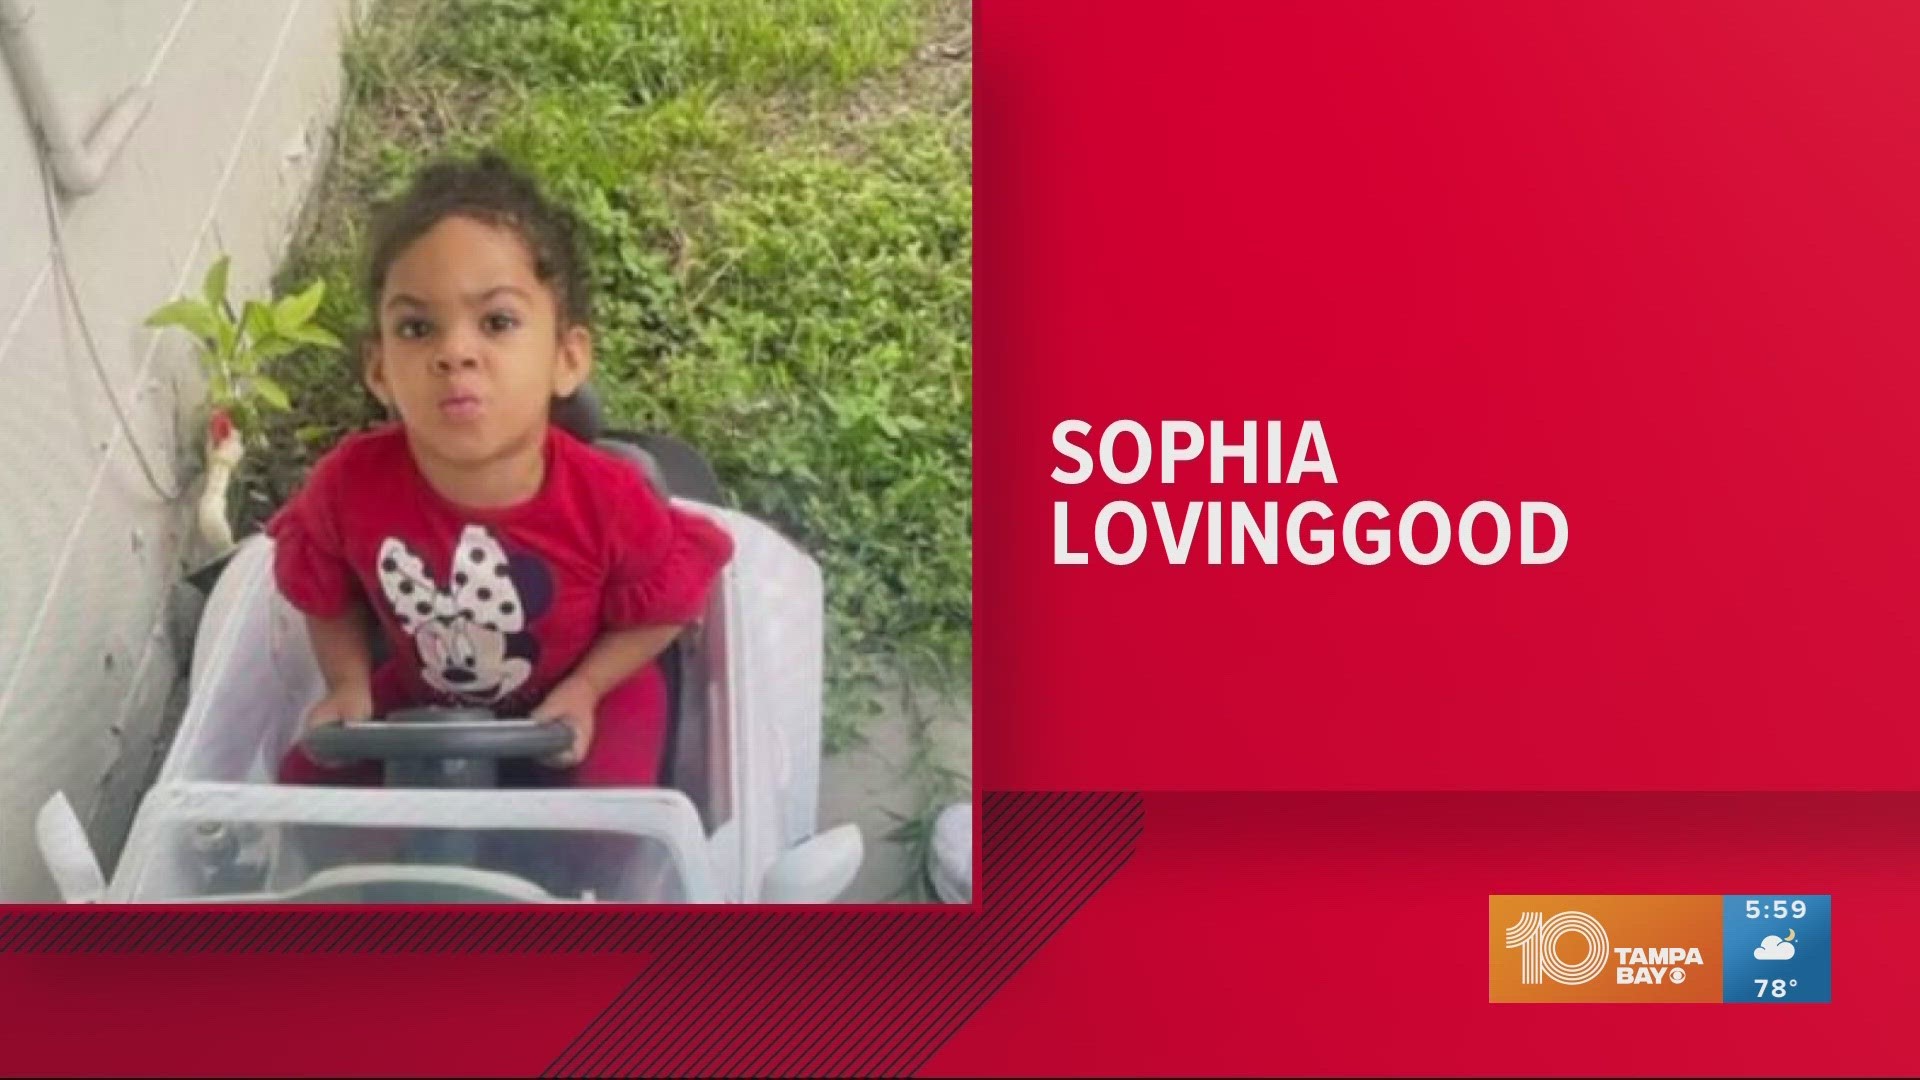 Sophia Lovinggood had been last seen with her grandmother Veronica Monday at a Seffner Walmart.